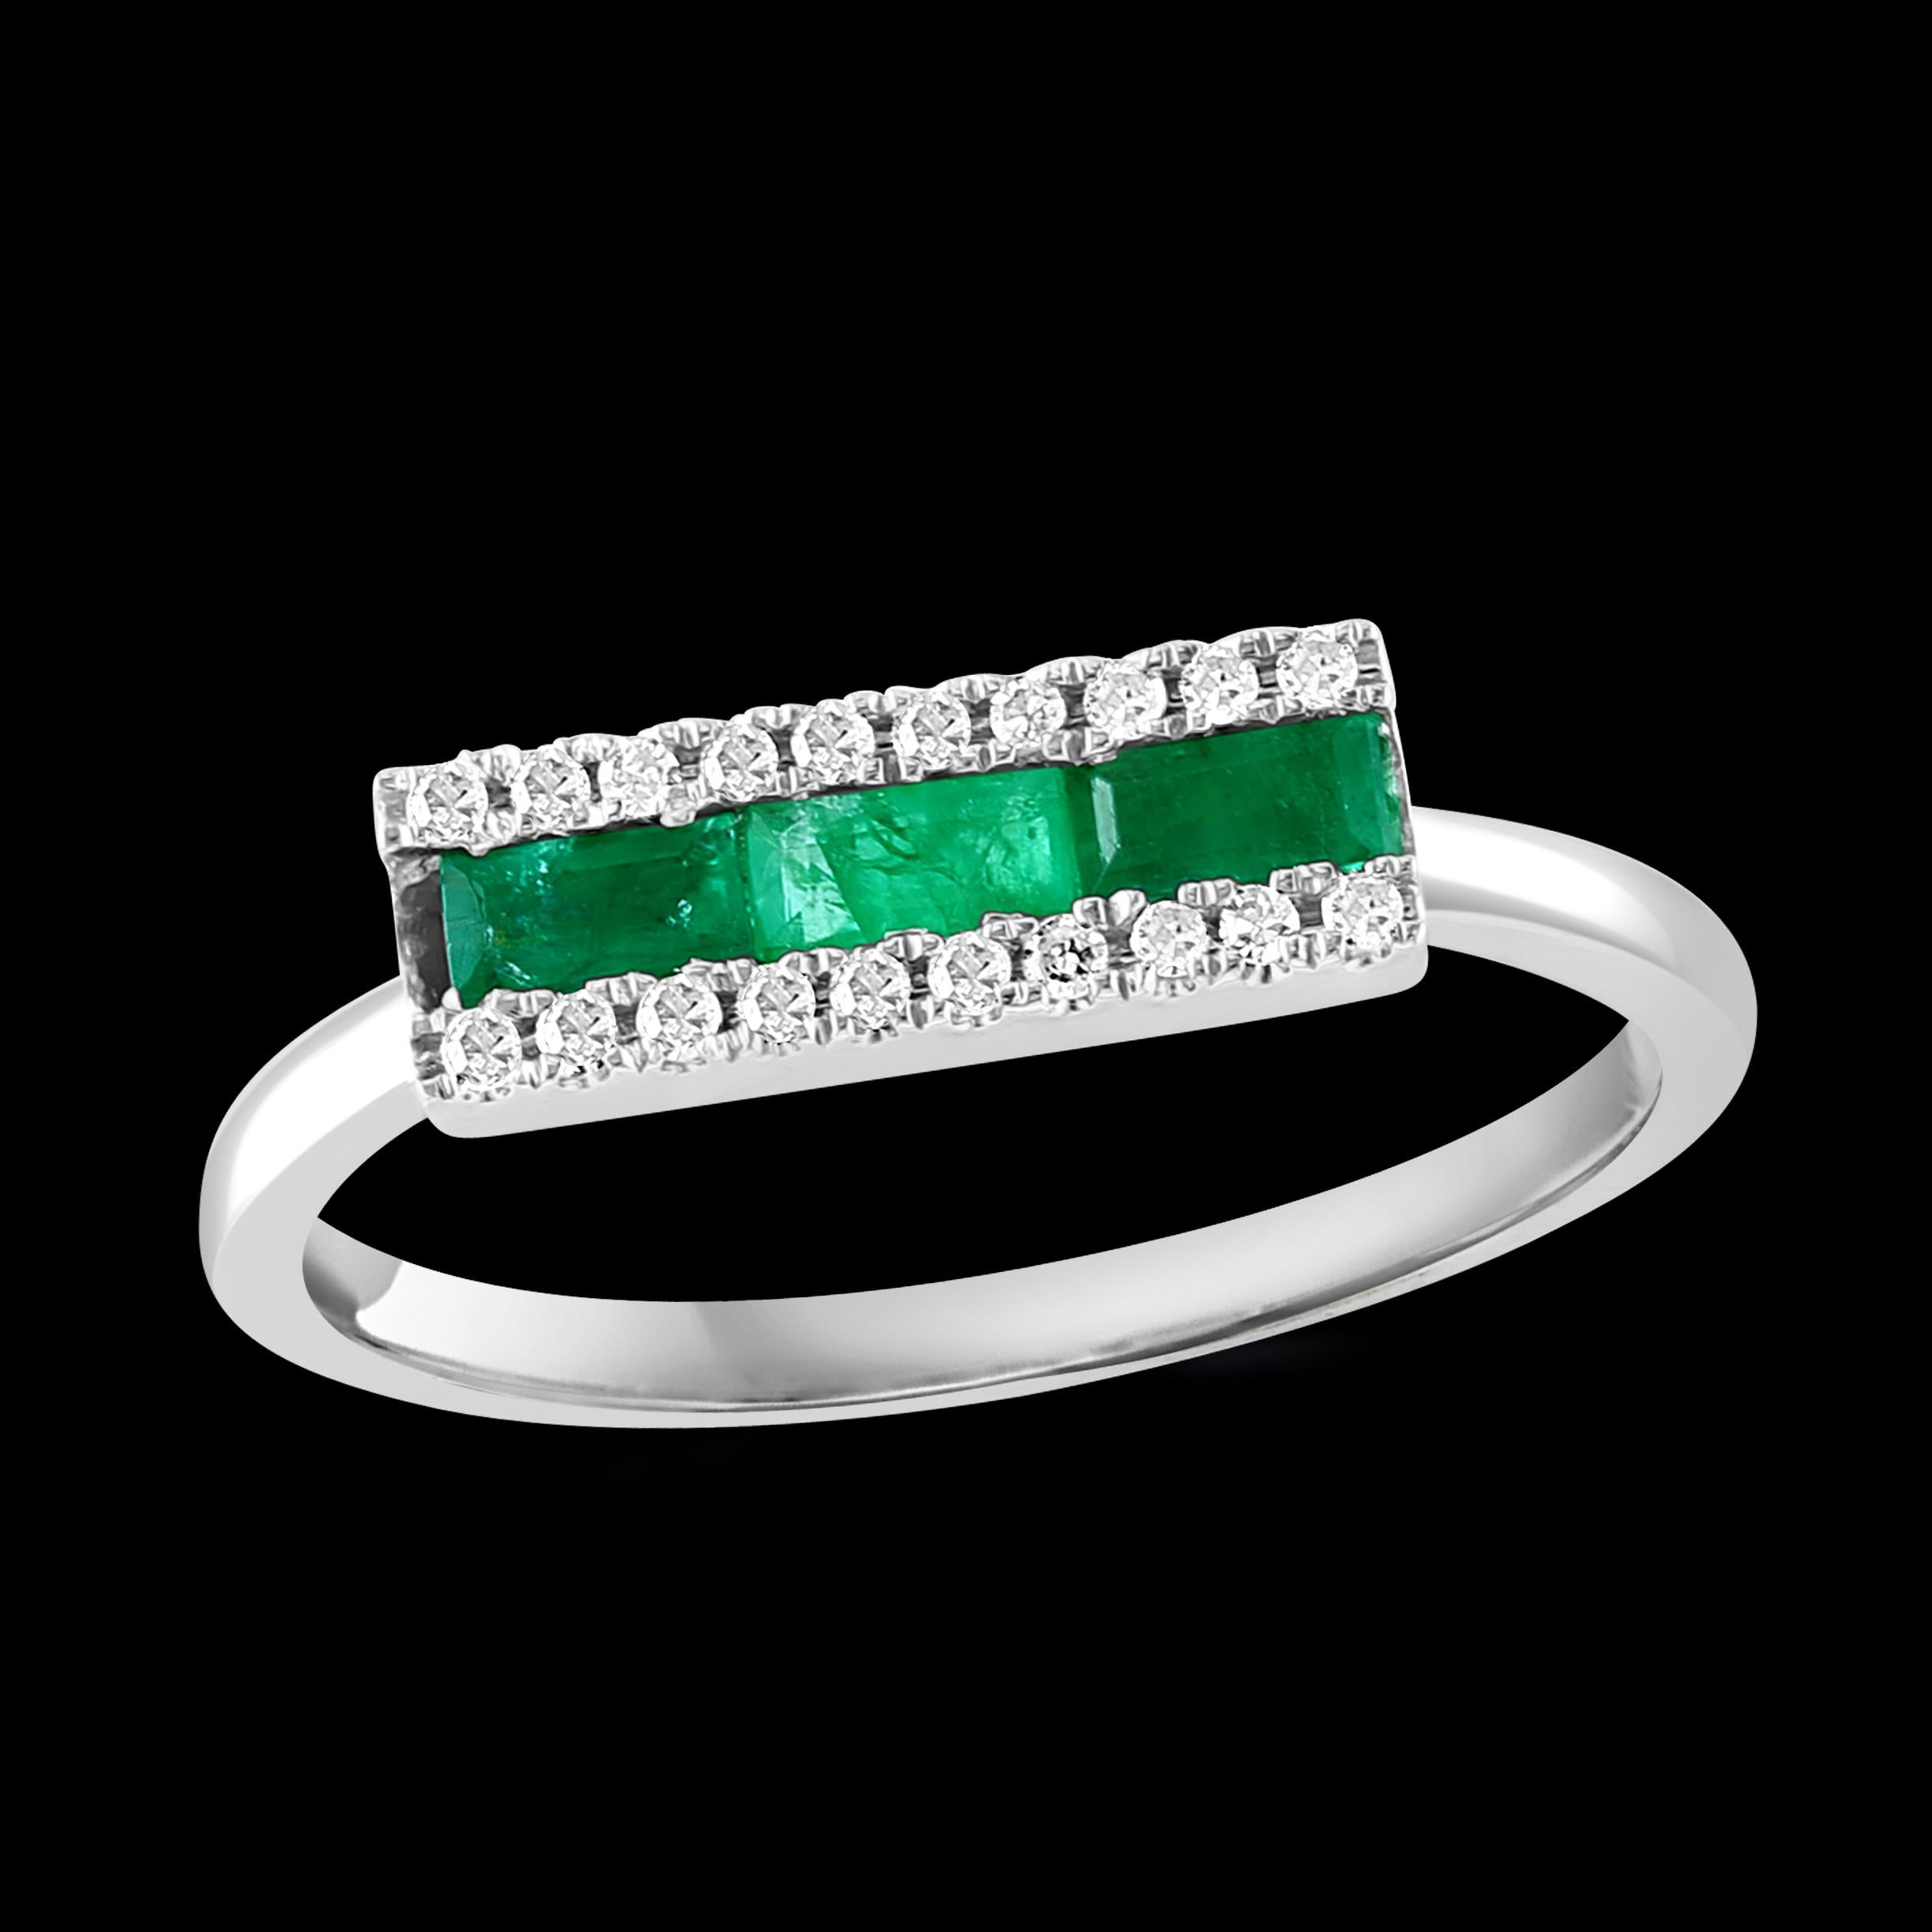 
Princess Cut  Emerald and Diamond Band/Ring 14 Karat Yellow Gold/ White Gold
Princess cut   Emerald in the Center row 
Each side of the emerald is  a diamond row 
  There are approximately 0.6 ct of emerald 
and 0.25 ct of diamonds 
14 Karat yellow